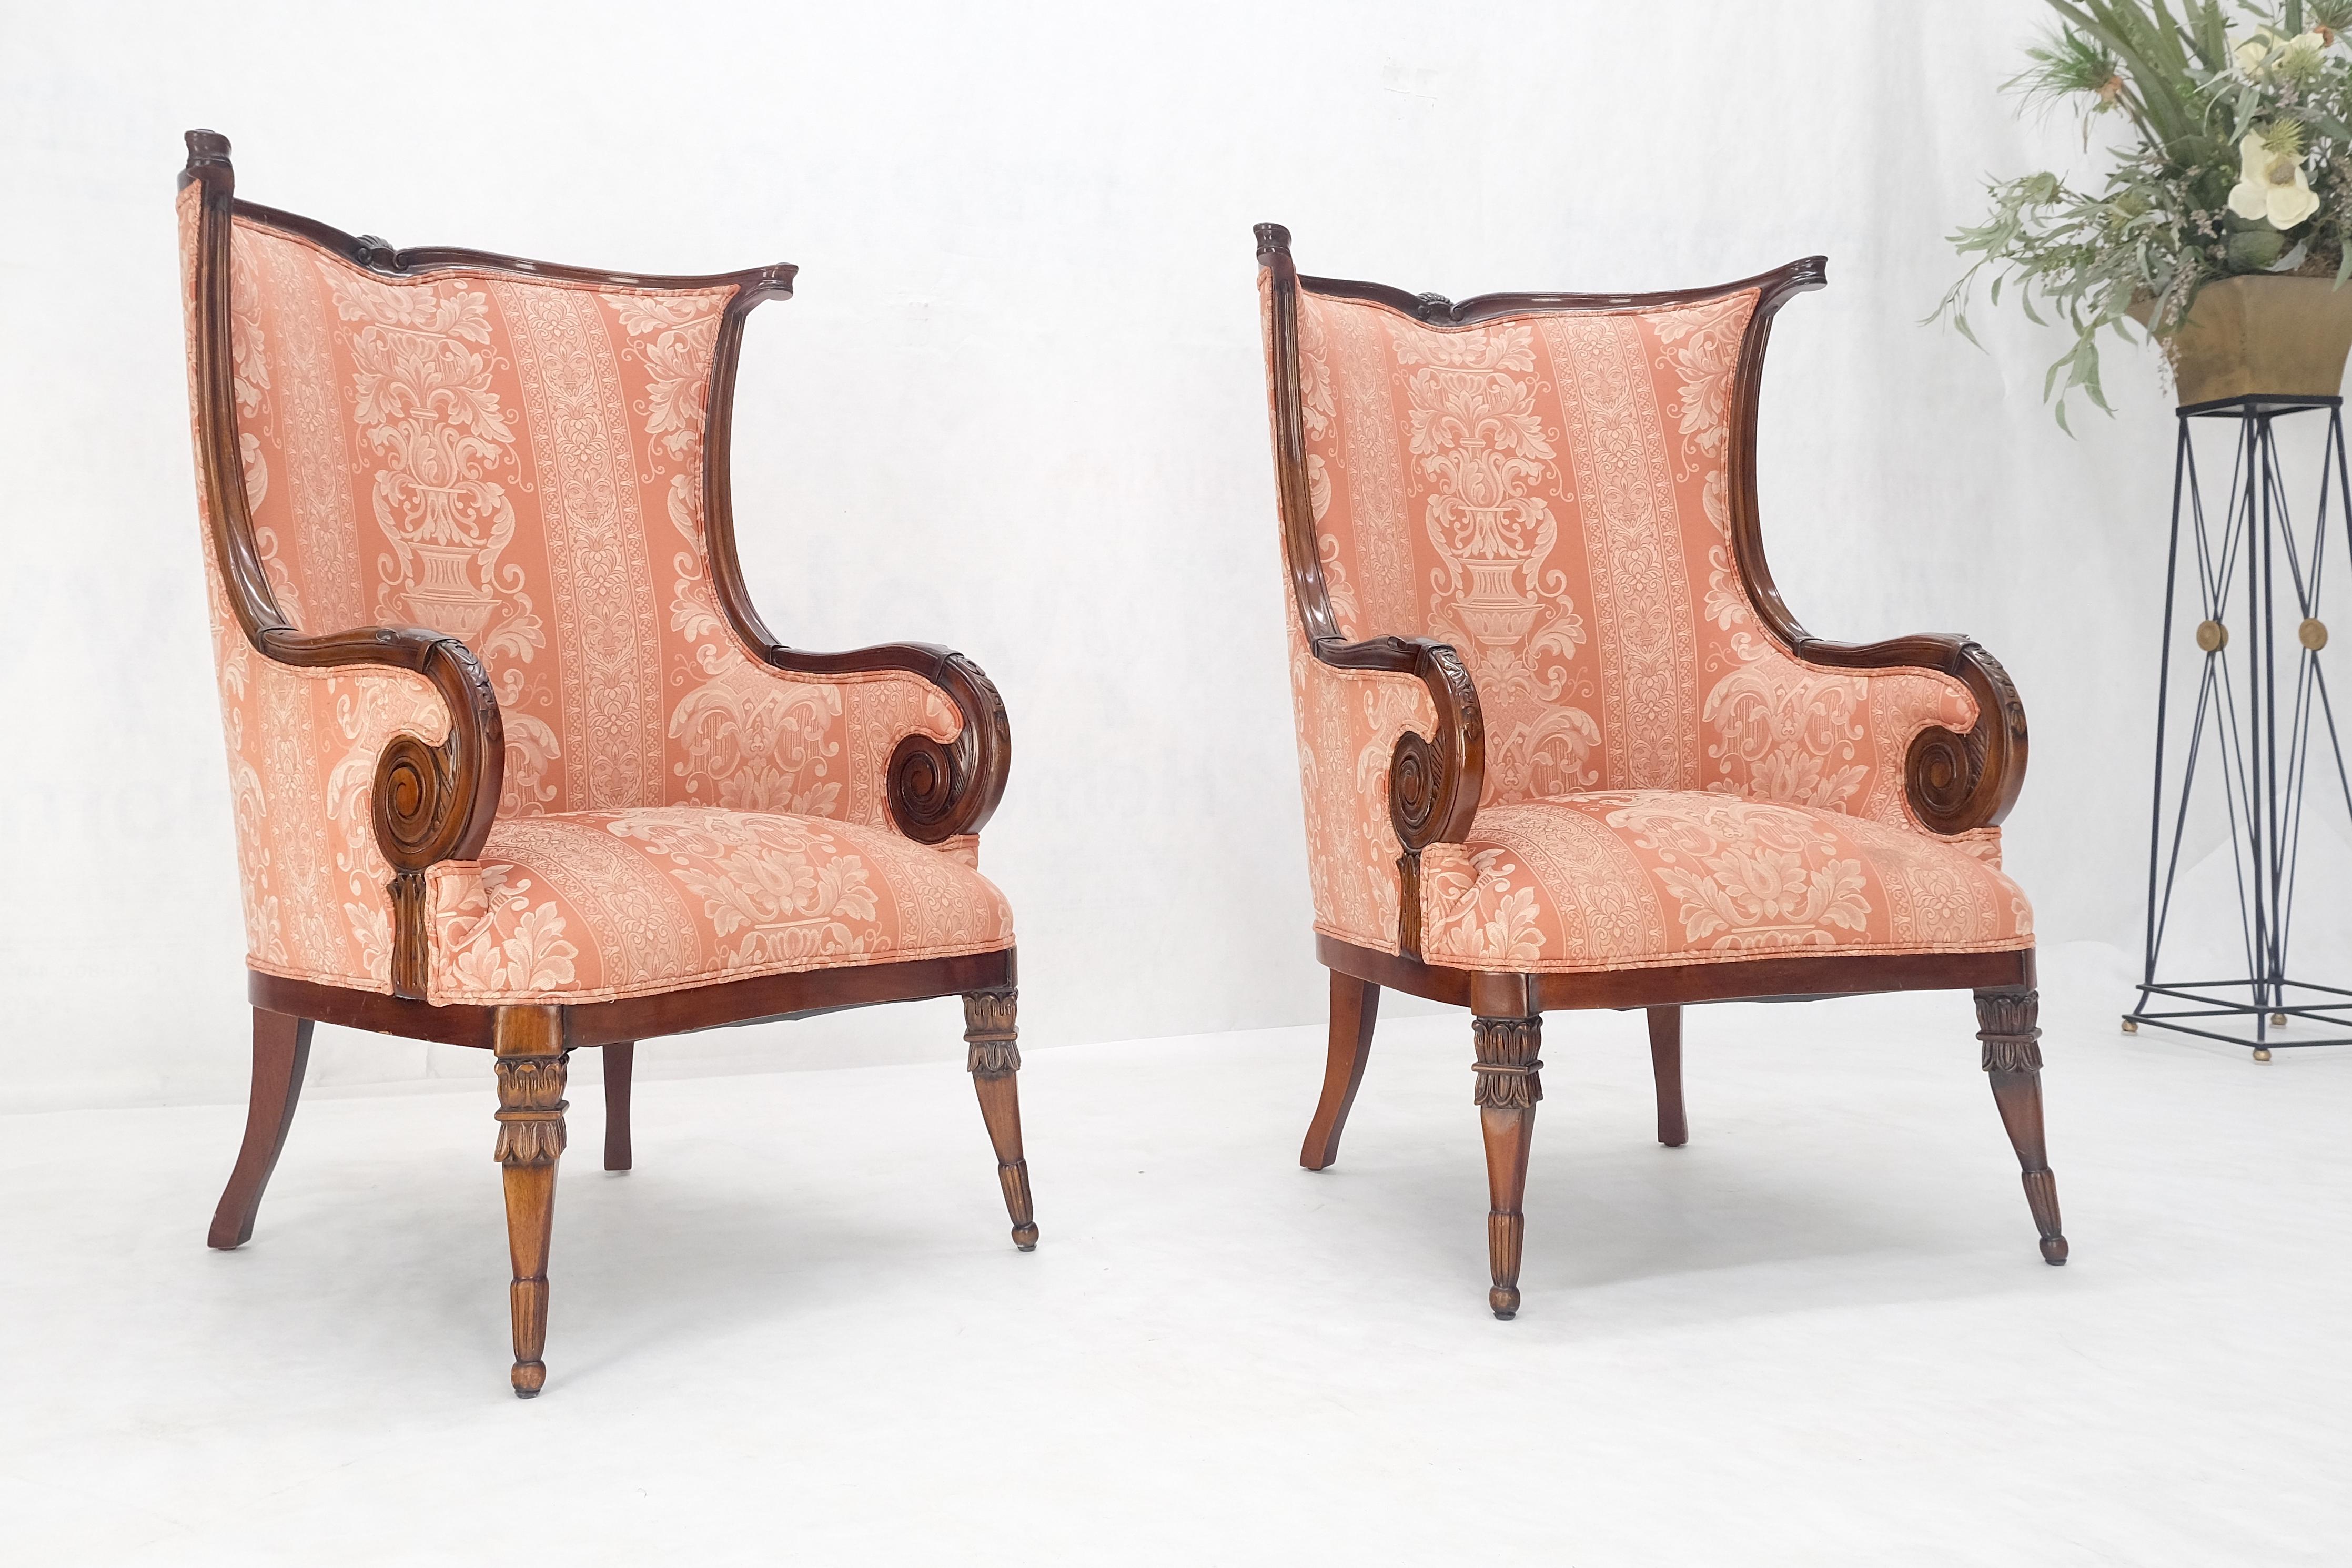 Pair of Fine Carved Mahogany Cream Silk Like Upholstery Regency Fire Side Chairs For Sale 4